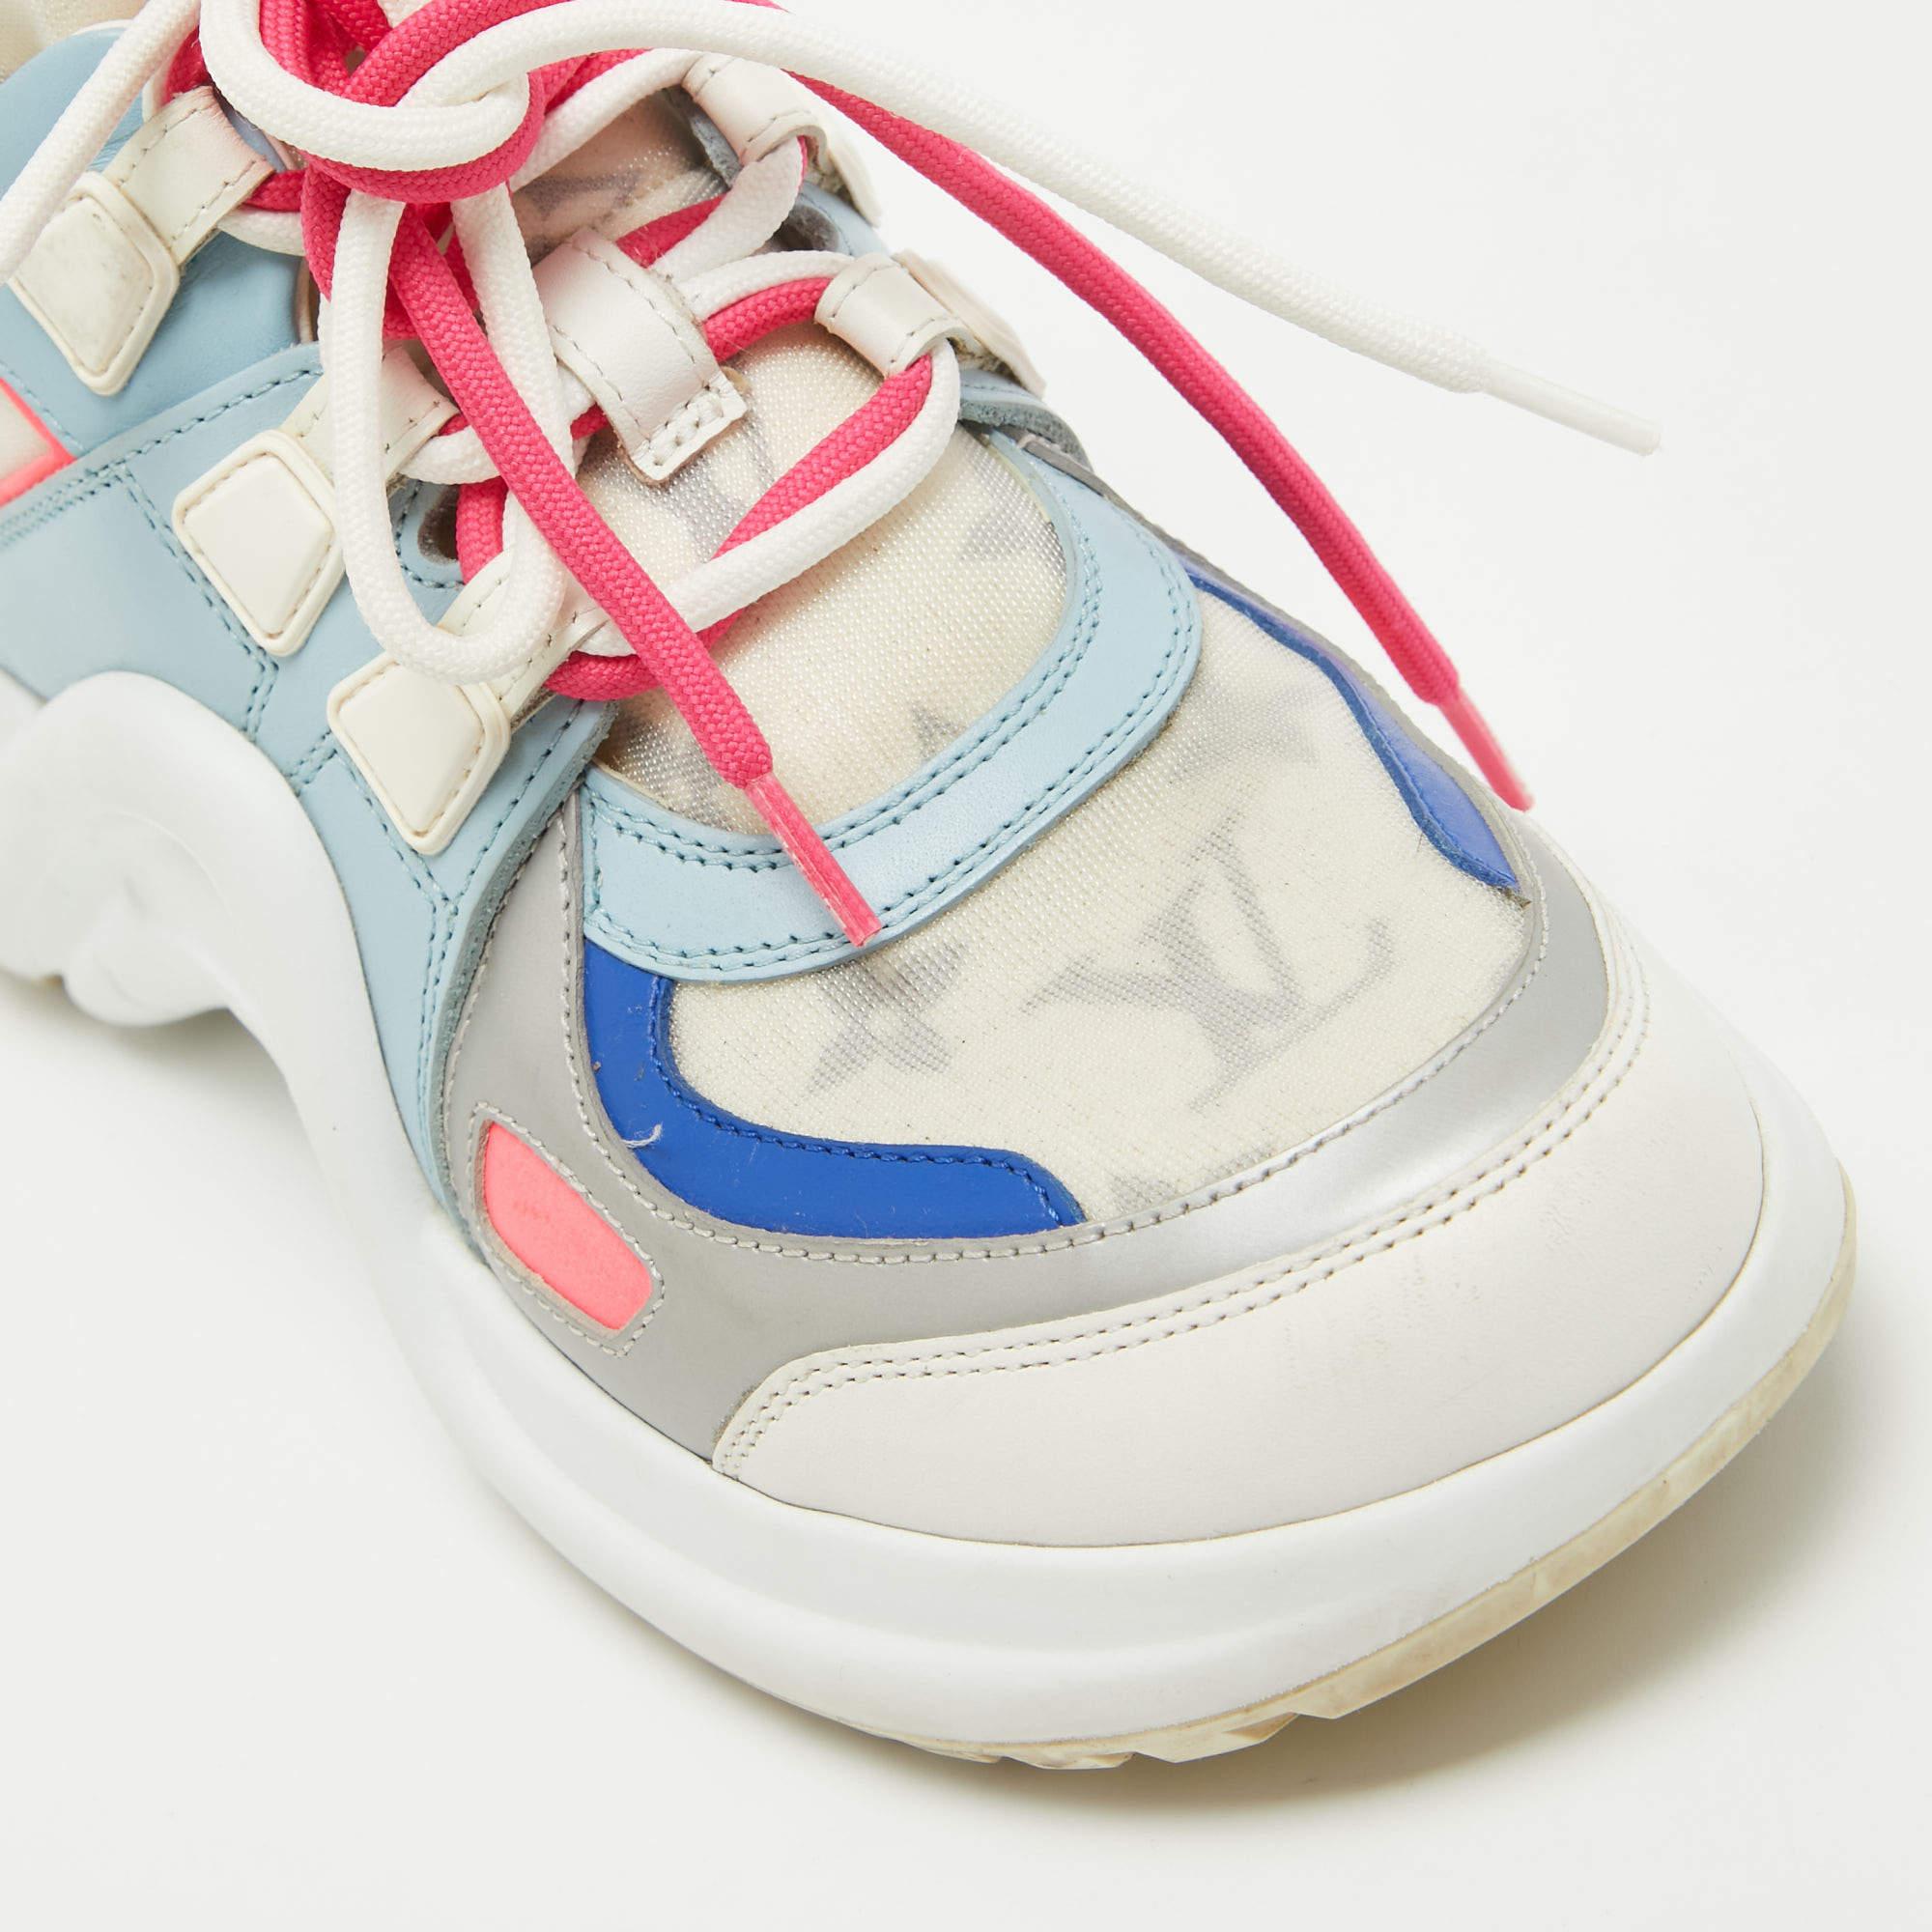 Louis Vuitton Multicolor Monogram Mesh and Leather Archlight Sneakers Size 36 2